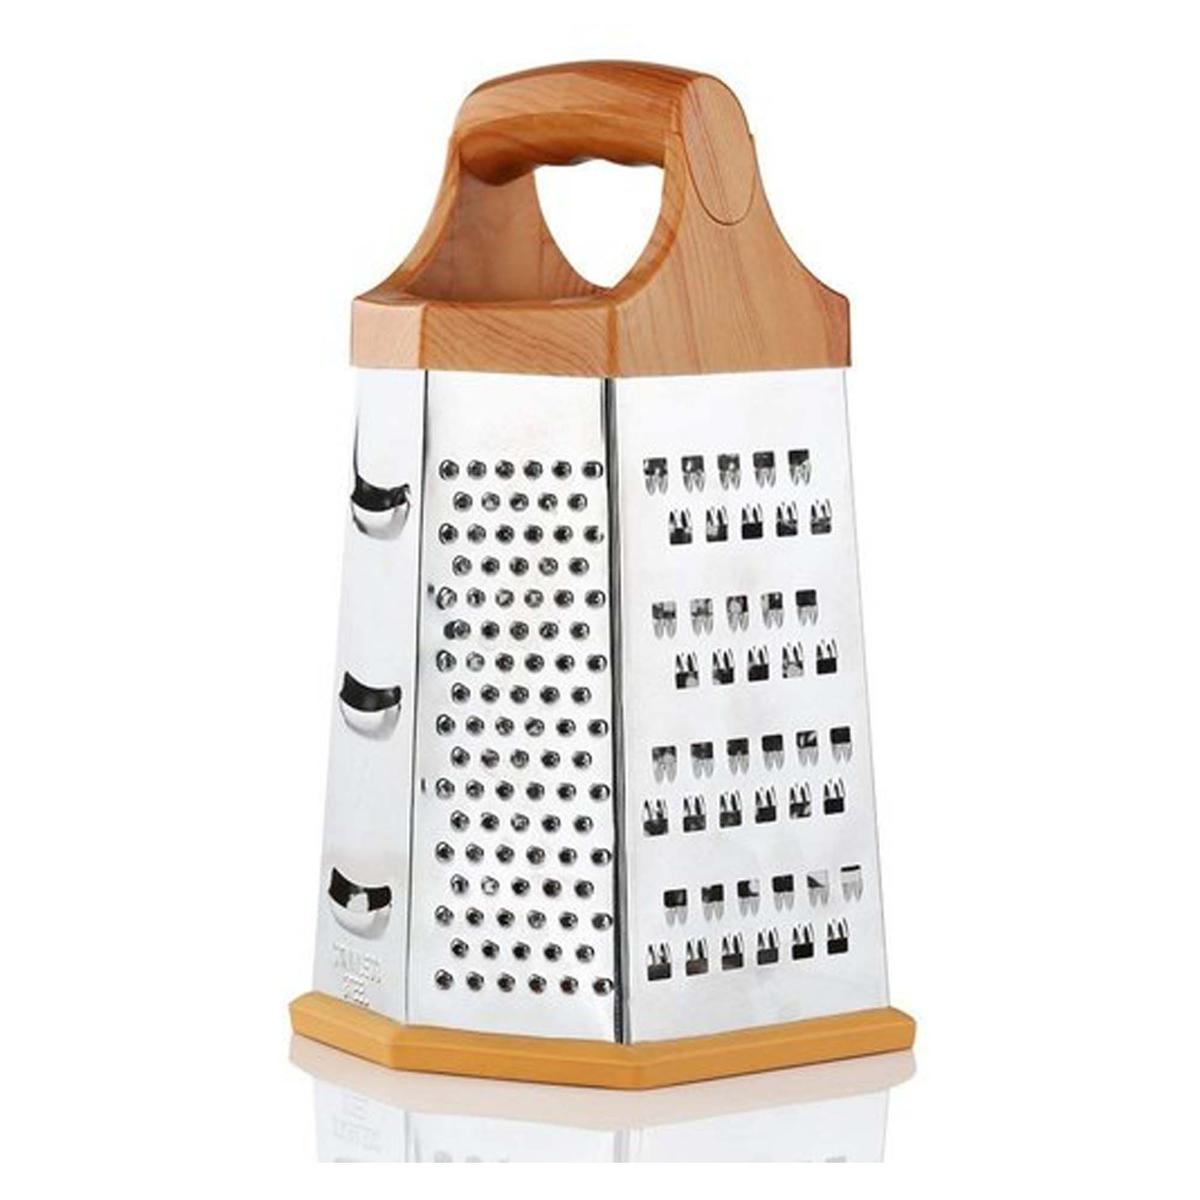 4-Sided Stainless Steel Box Cheese Carrot Food Grater Shredder 21.5*8.5cm  Silver